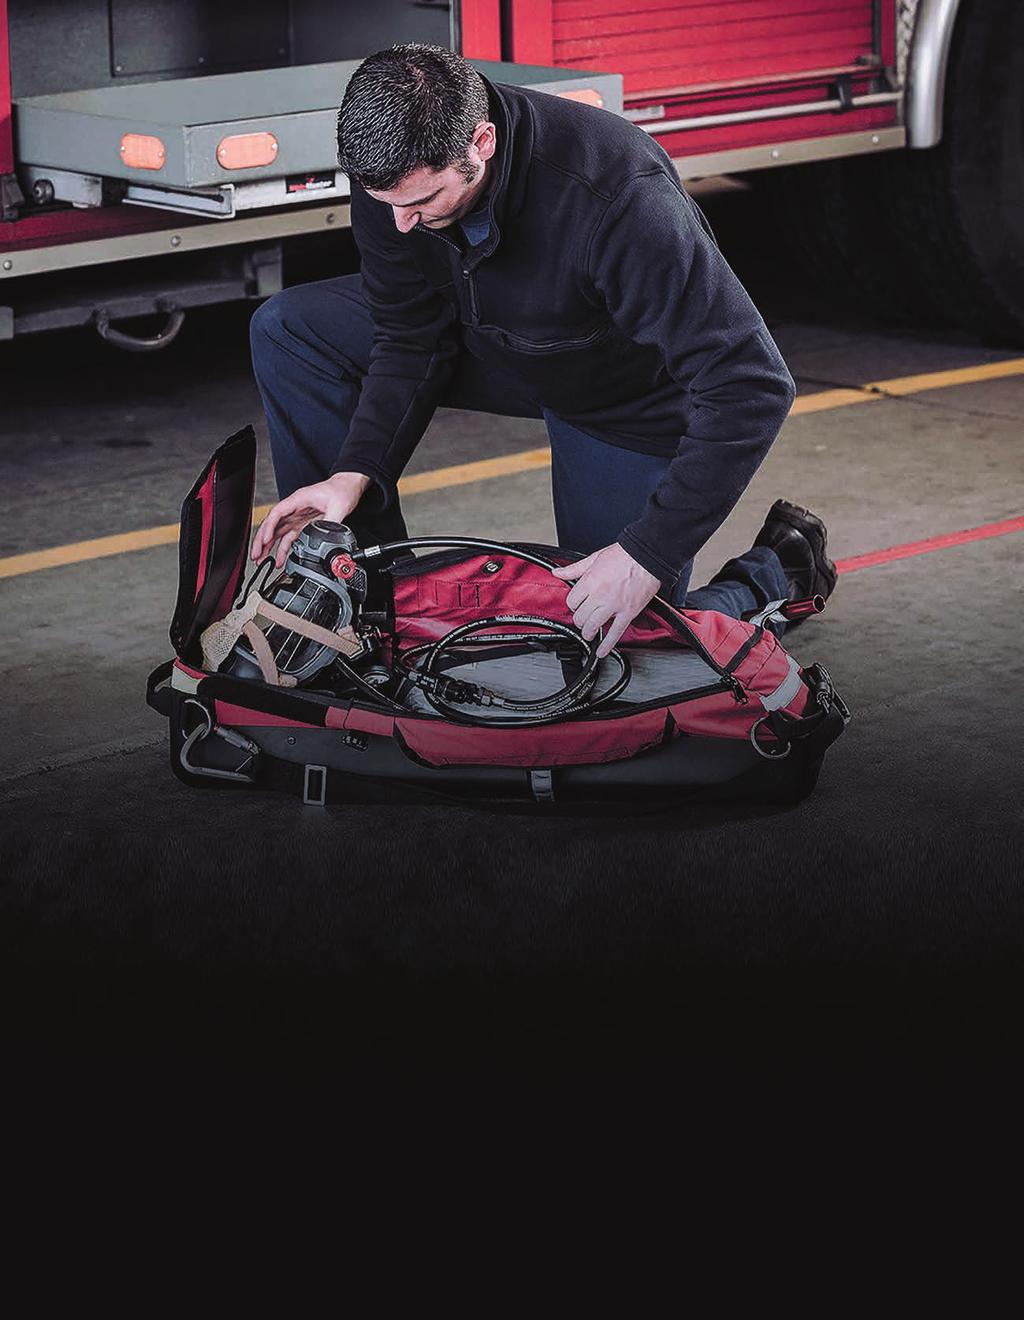 STRUCTURE GEAR L-3 LITE SPEED RIT BAG The L3 Lite Speed RIT Bag is streamlined into a fundamental bag for optimum rescue efficiency in low-visibility, high-stress situations.» Perfect for all RIT, F.